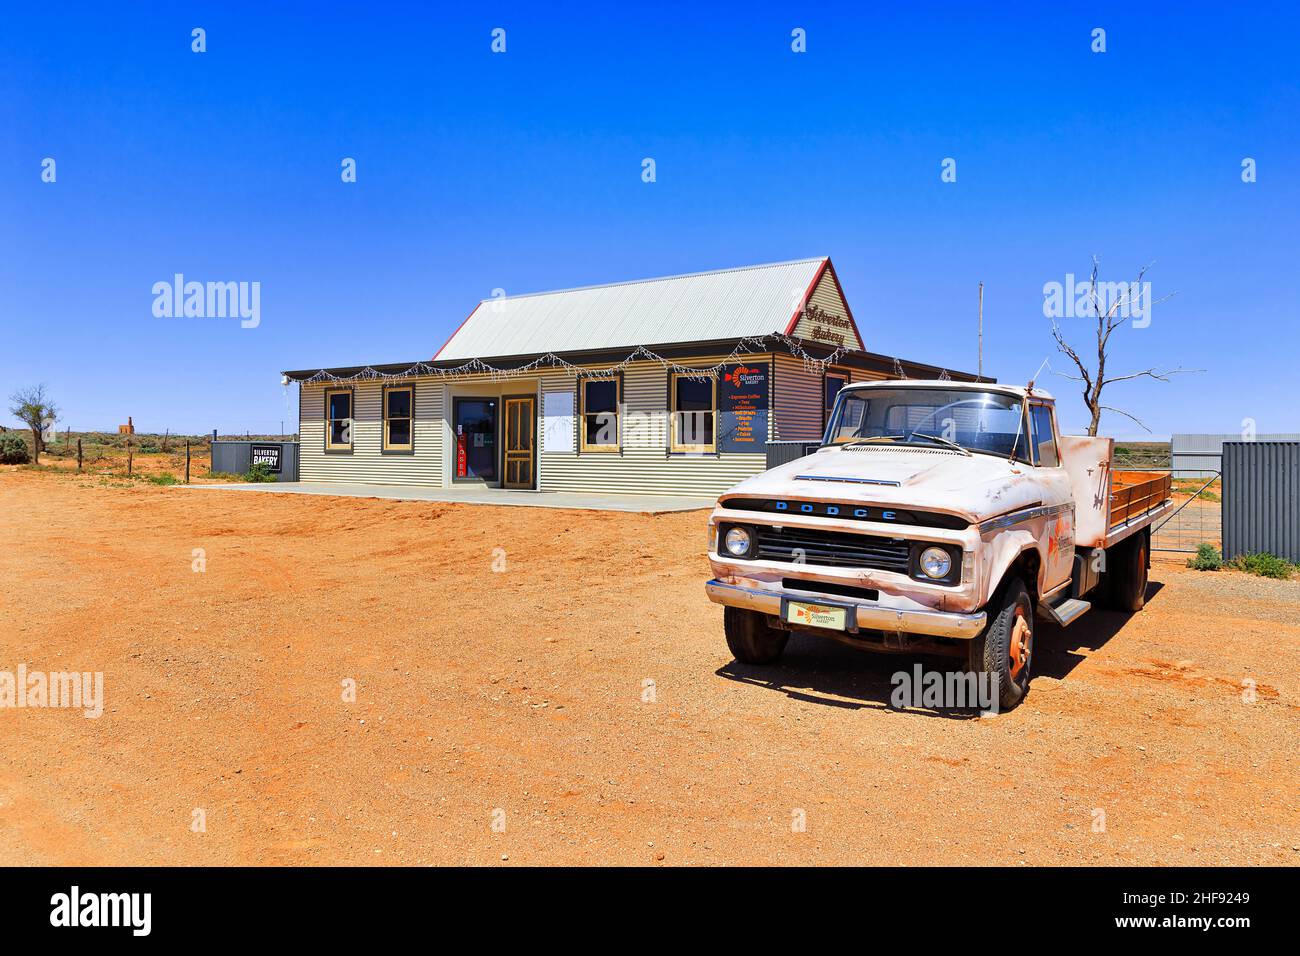 Silverton, Australia - 27 Dec 2021: Historic Silverton bakery store with old truck car in ghost town of Australian outback. Stock Photo